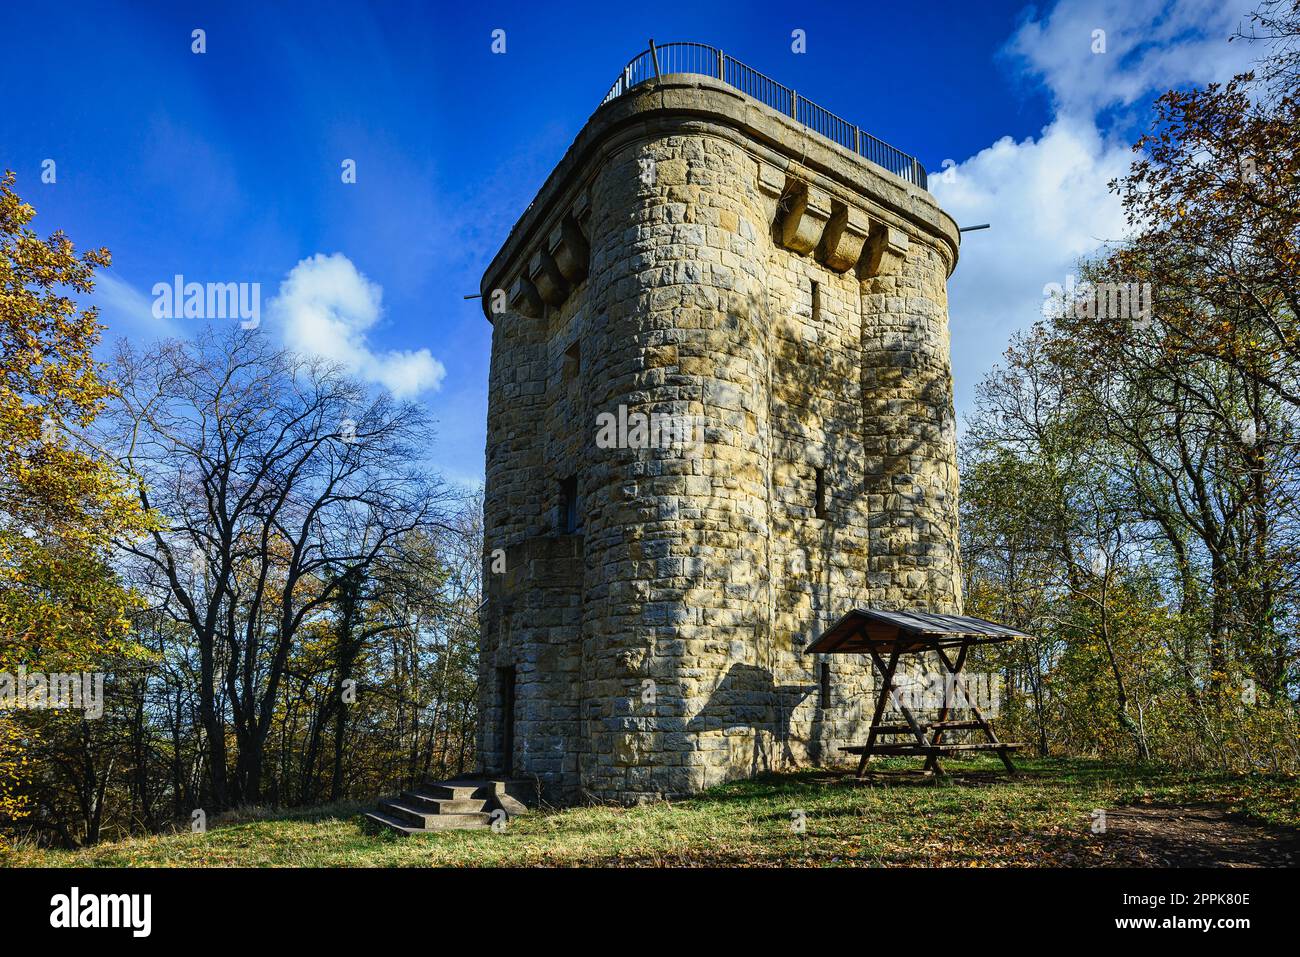 Colorful autumn day with the Bismarck Tower near Ballenstedt in Saxony-Anhalt, Germany Stock Photo